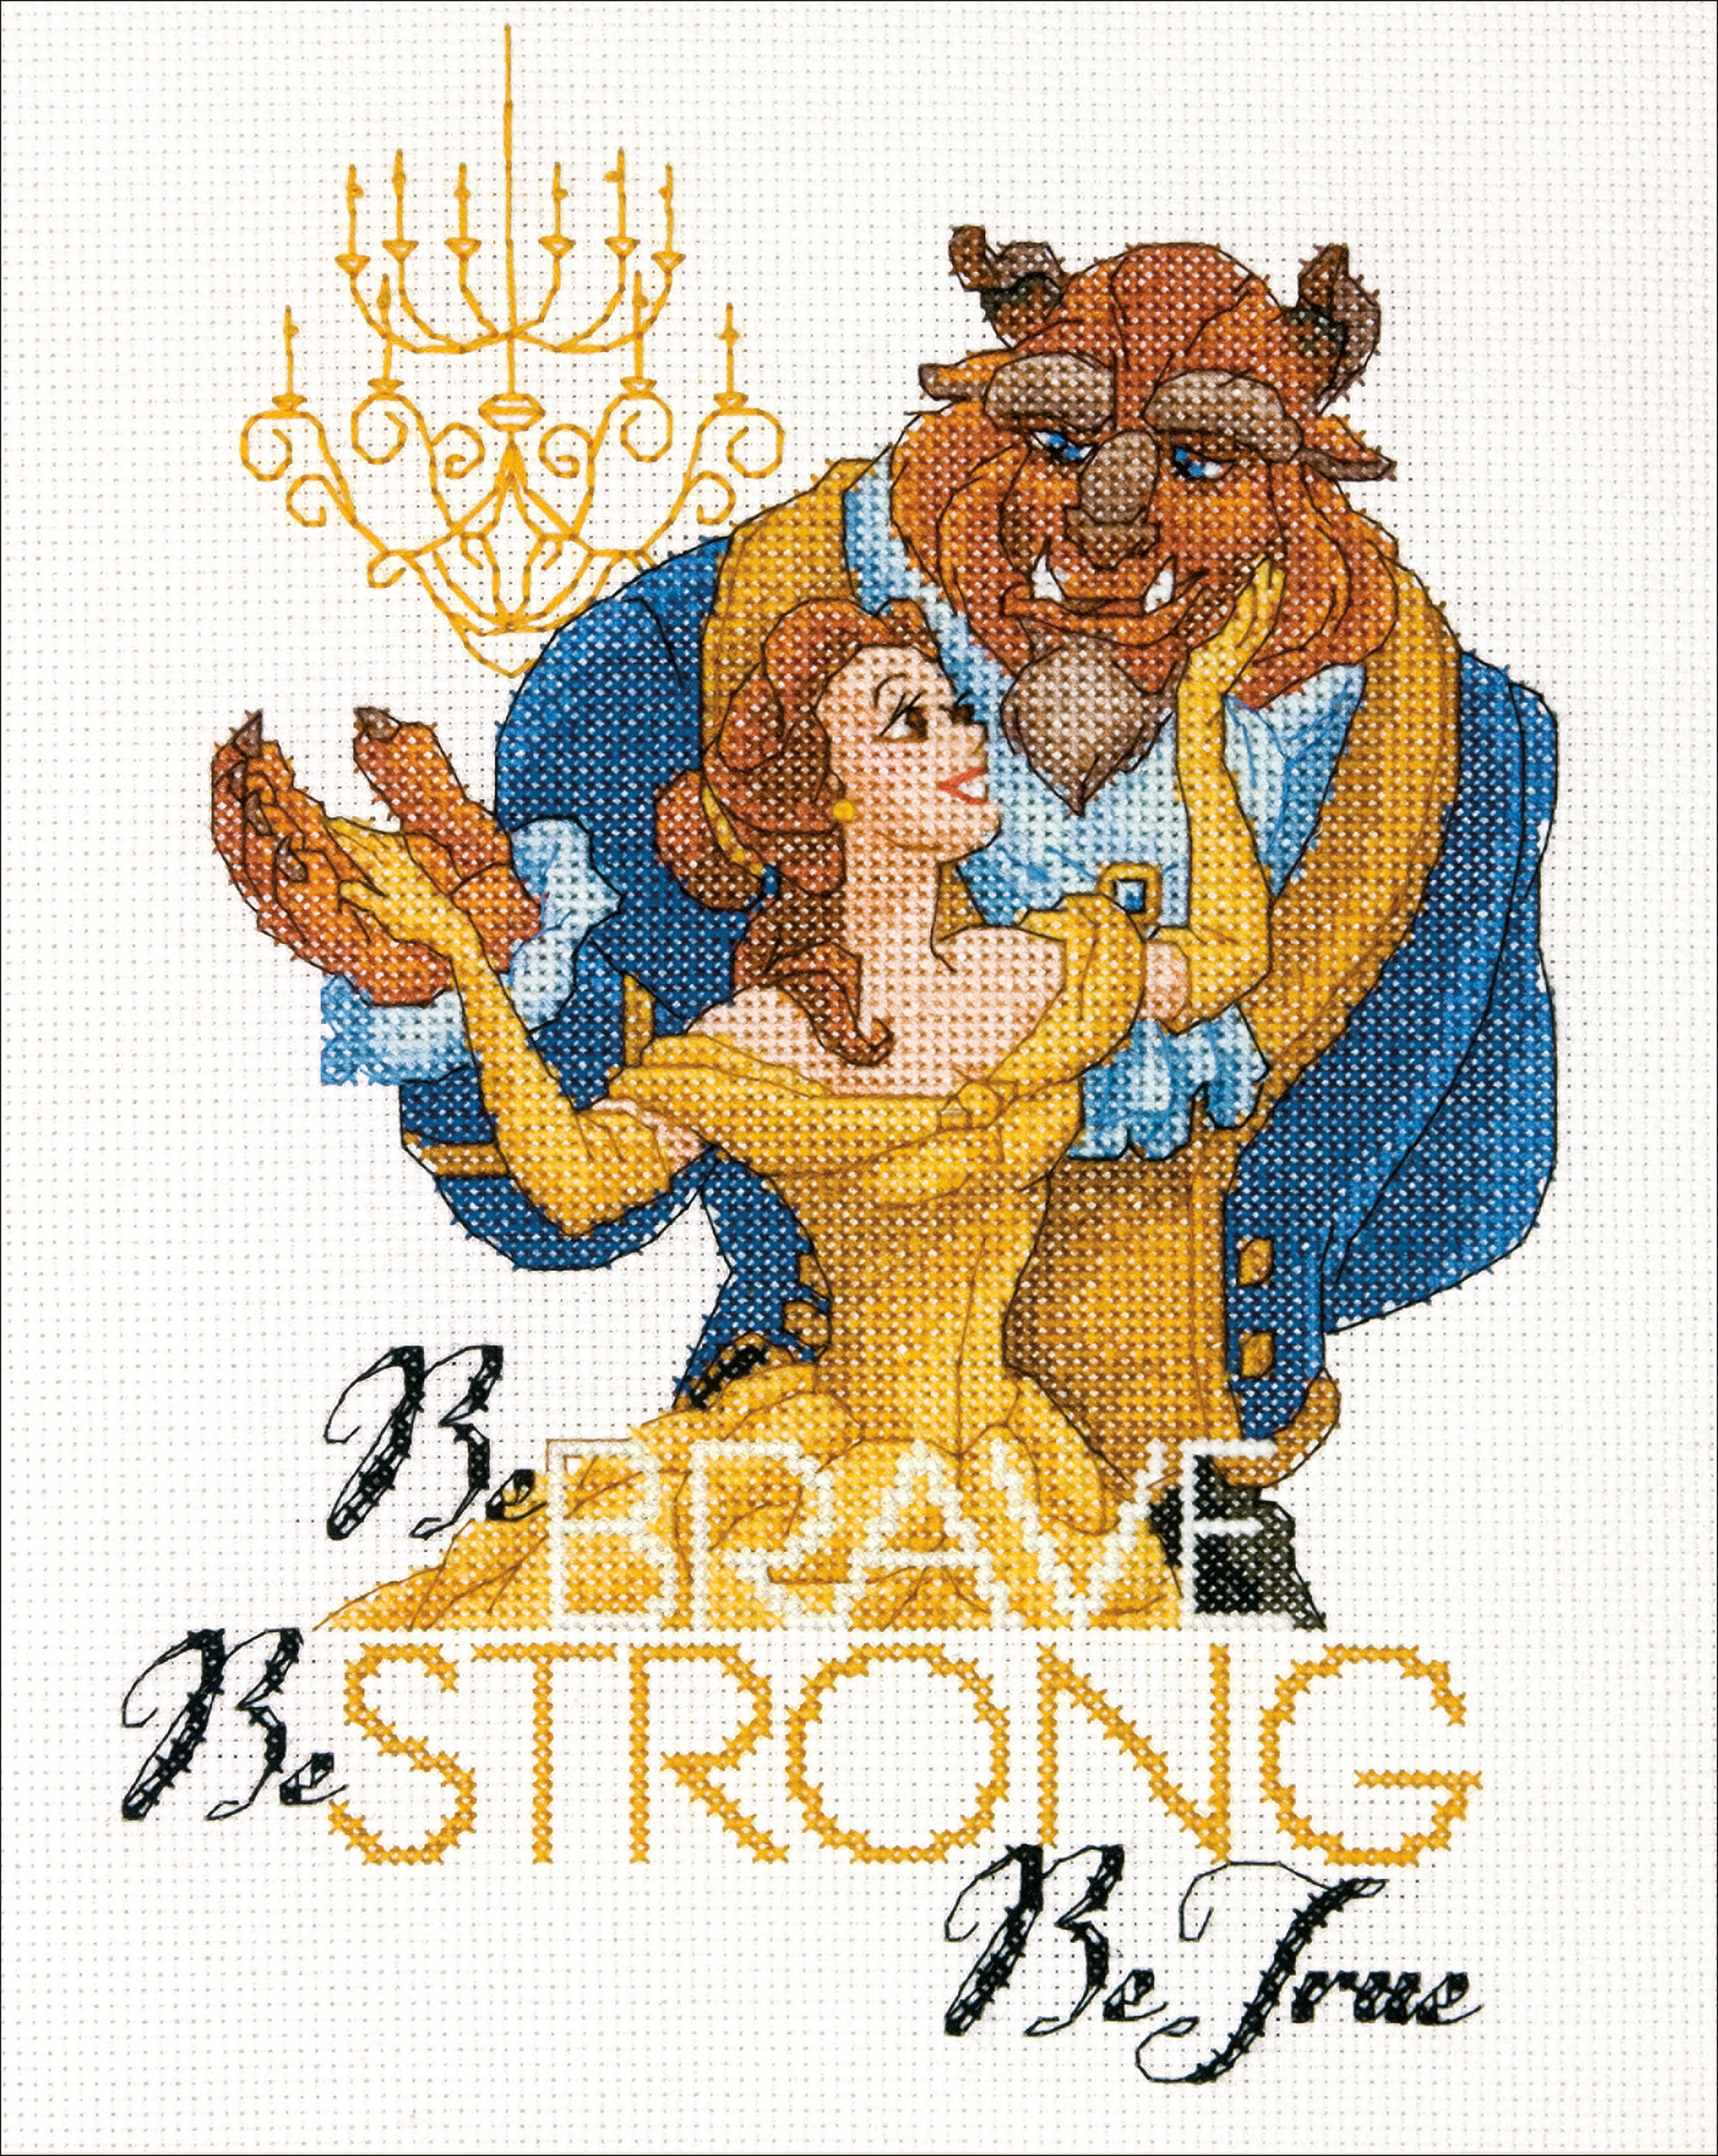 Dimensions Disney Princess Counted Cross Stitch Kit 8 X10 Be Brave 14 Count 88677353582  eBay